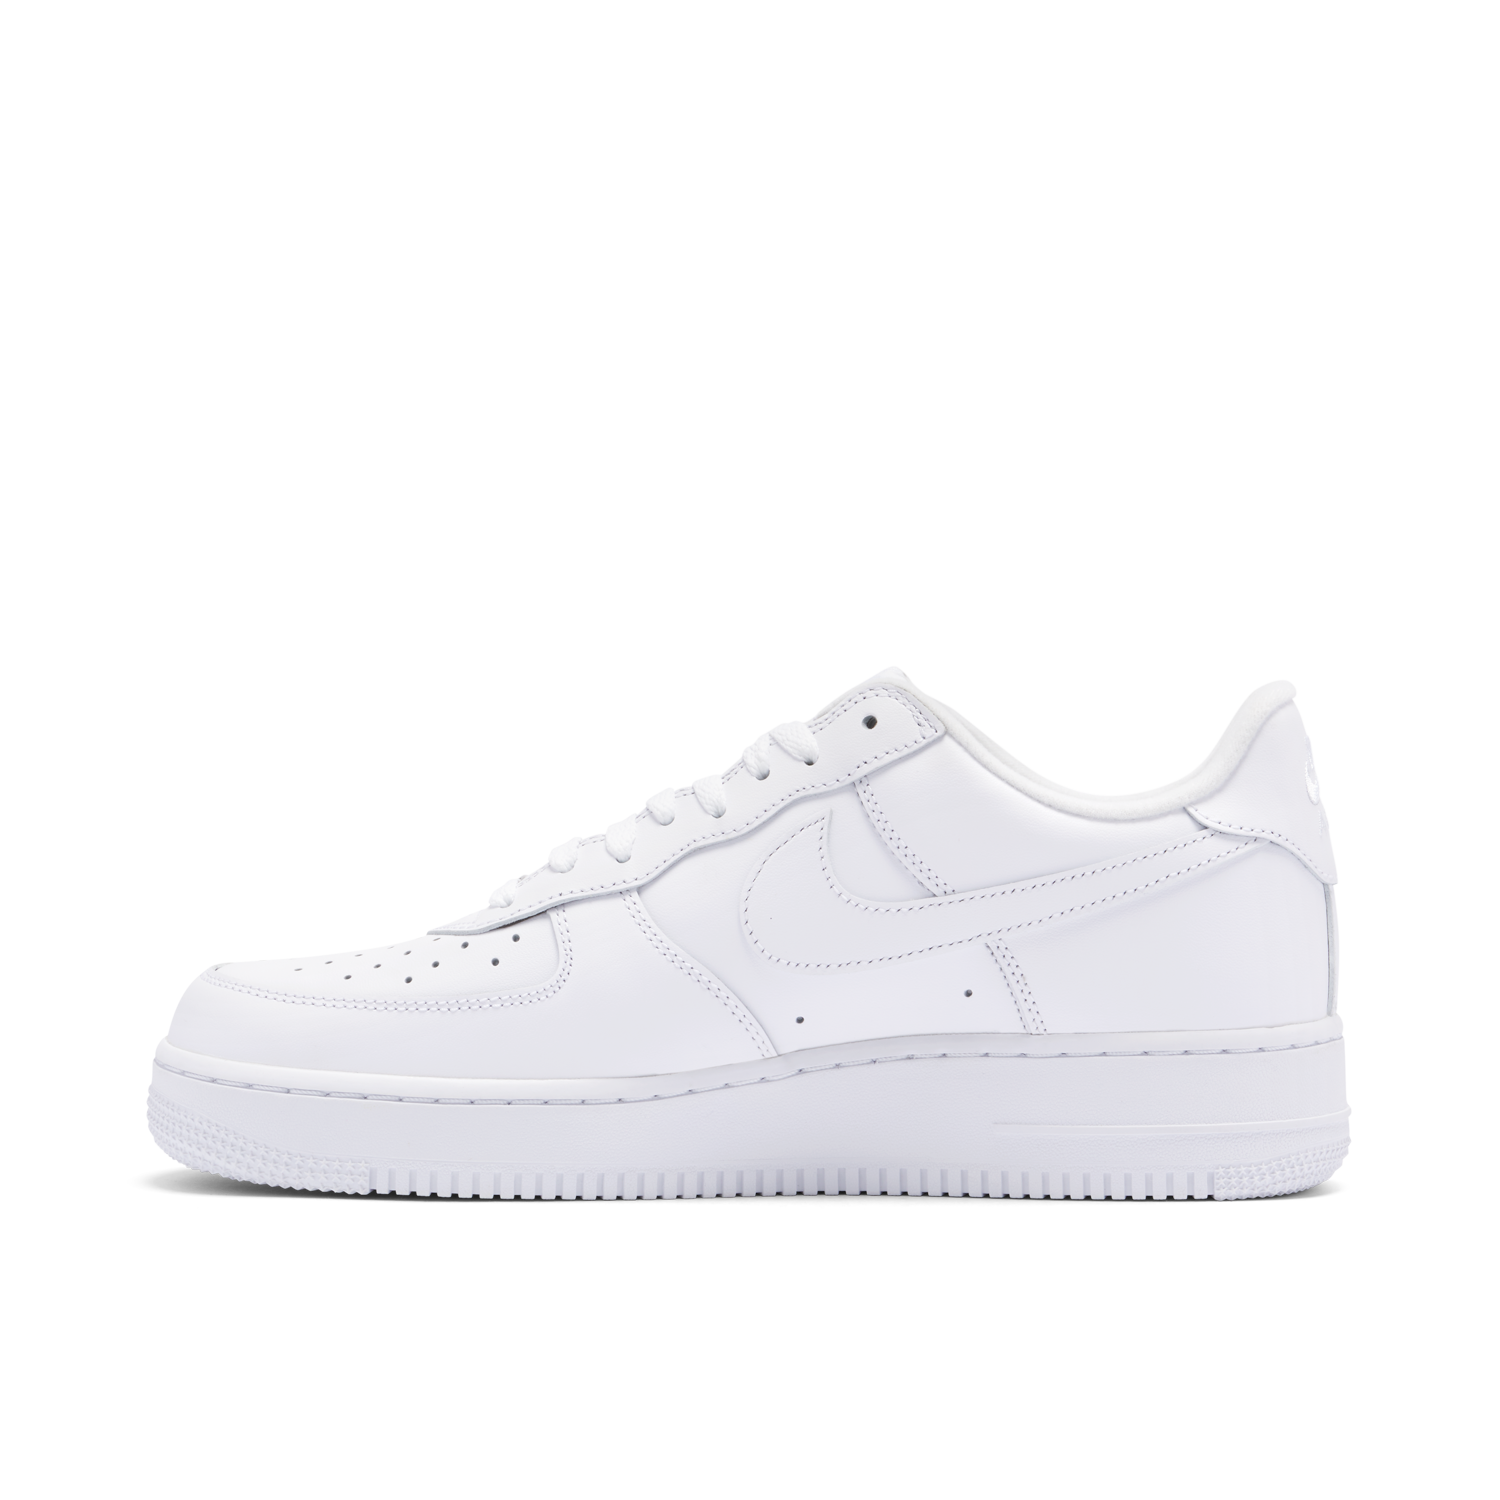 🚨SOLD🚨 2019 Nike Air Force 1 Low Premium 'Ivory' 👟 Men's Size 10 Original  Box Worn Condition $65 ✓ SHOP 100% AUTHENTIC SNEAKERS 🤩 Link…